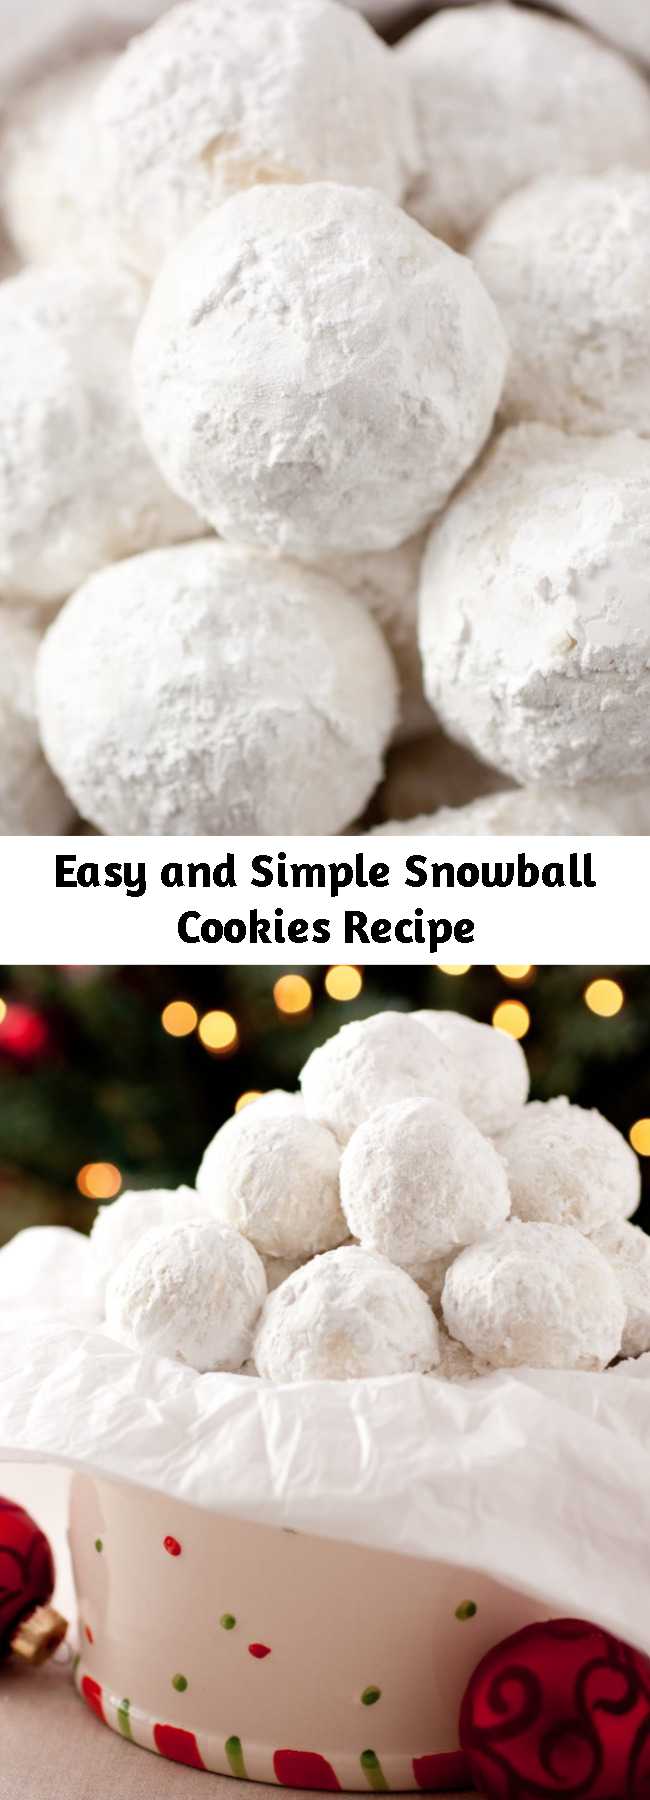 Easy and Simple Snowball Cookies Recipe - Soft and tender, buttery nutty cookie rolled in a blizzard of perfectly white powdered sugar. A must try Christmas cookie!